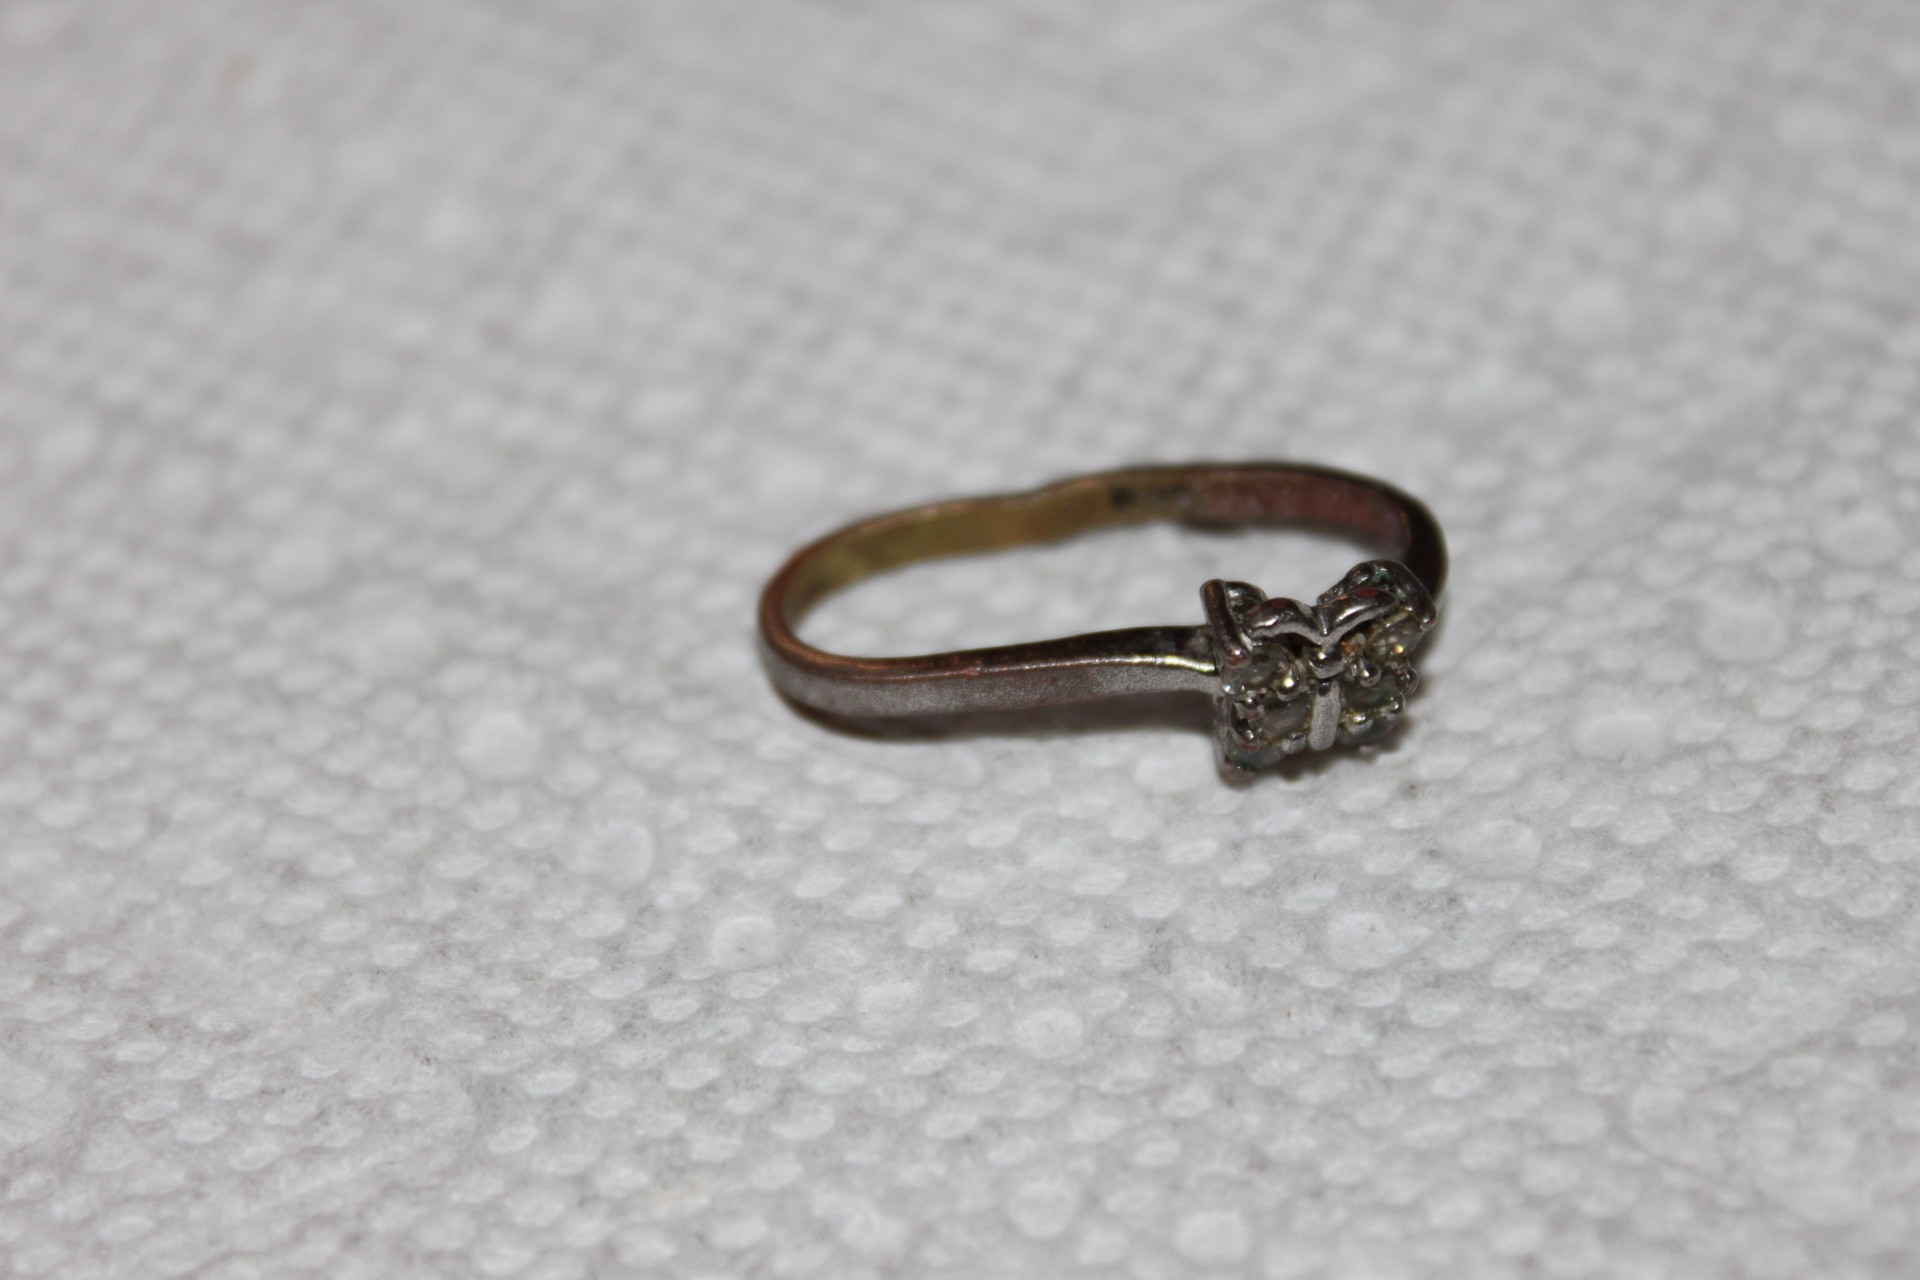 Rsc On A Ring Metal Detecting For Jewelry